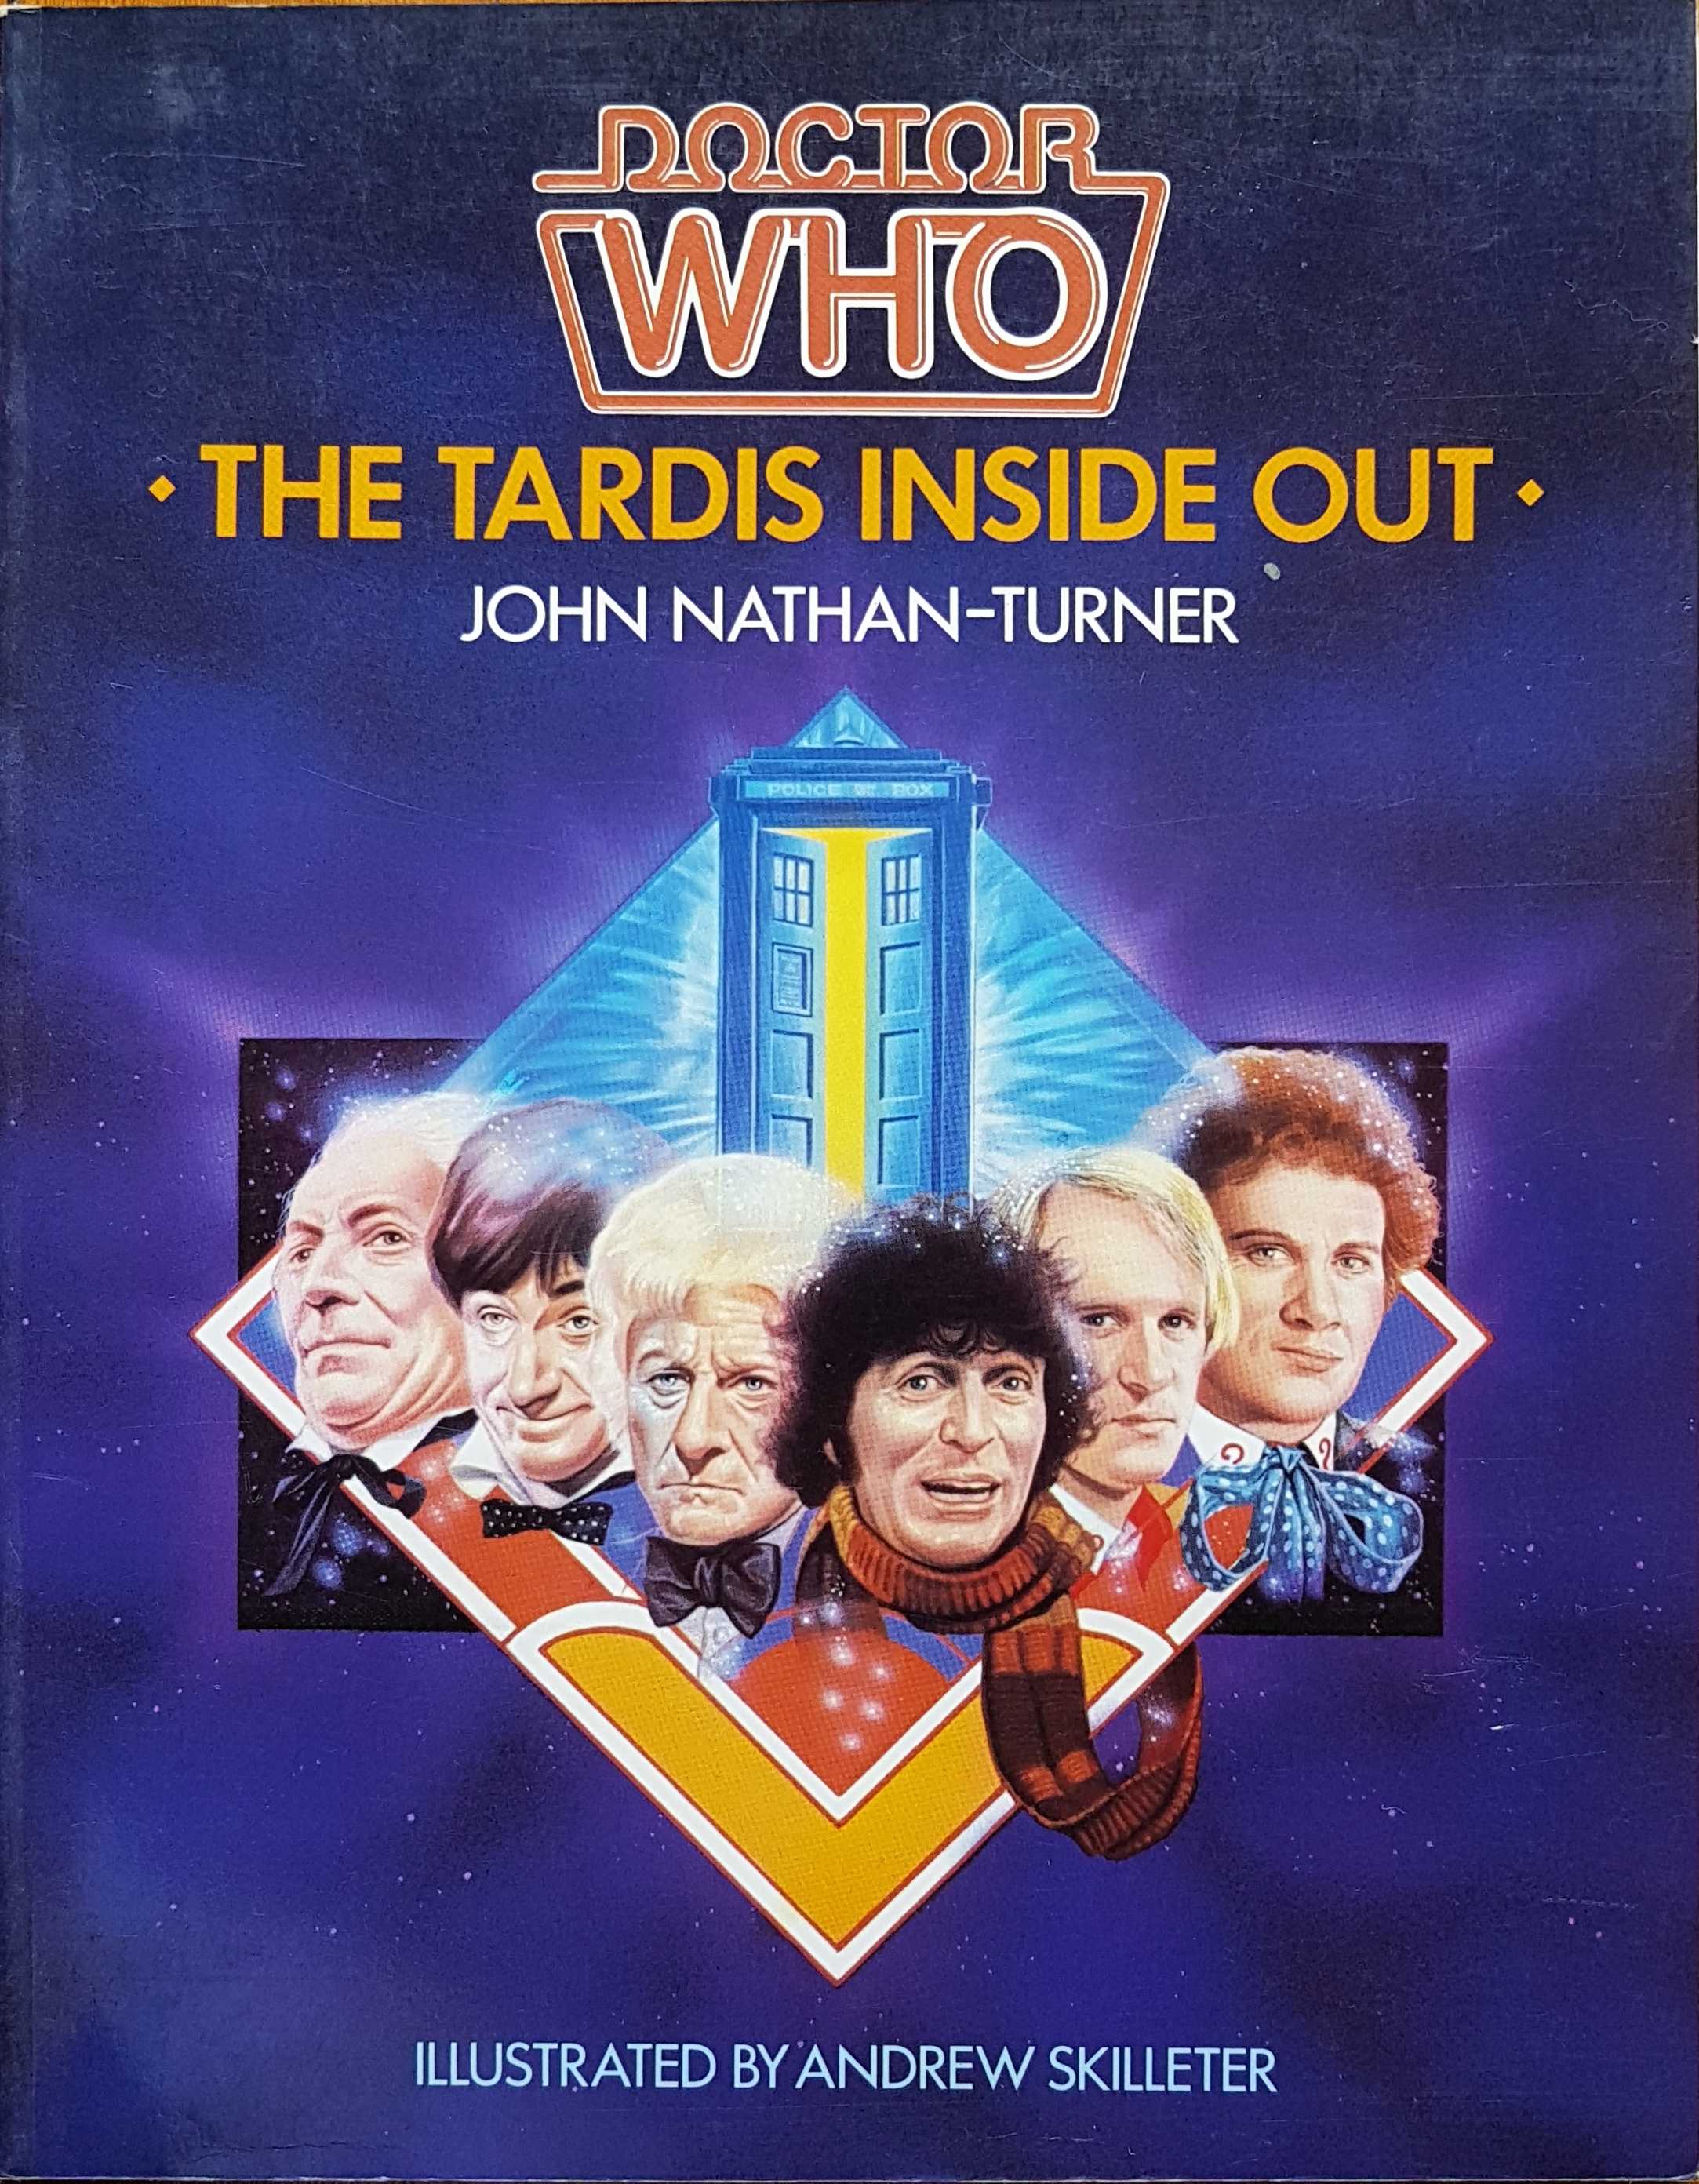 Picture of 0946826-65-X Doctor Who - The Tardis inside and out by artist John Nathan-Turner from the BBC records and Tapes library